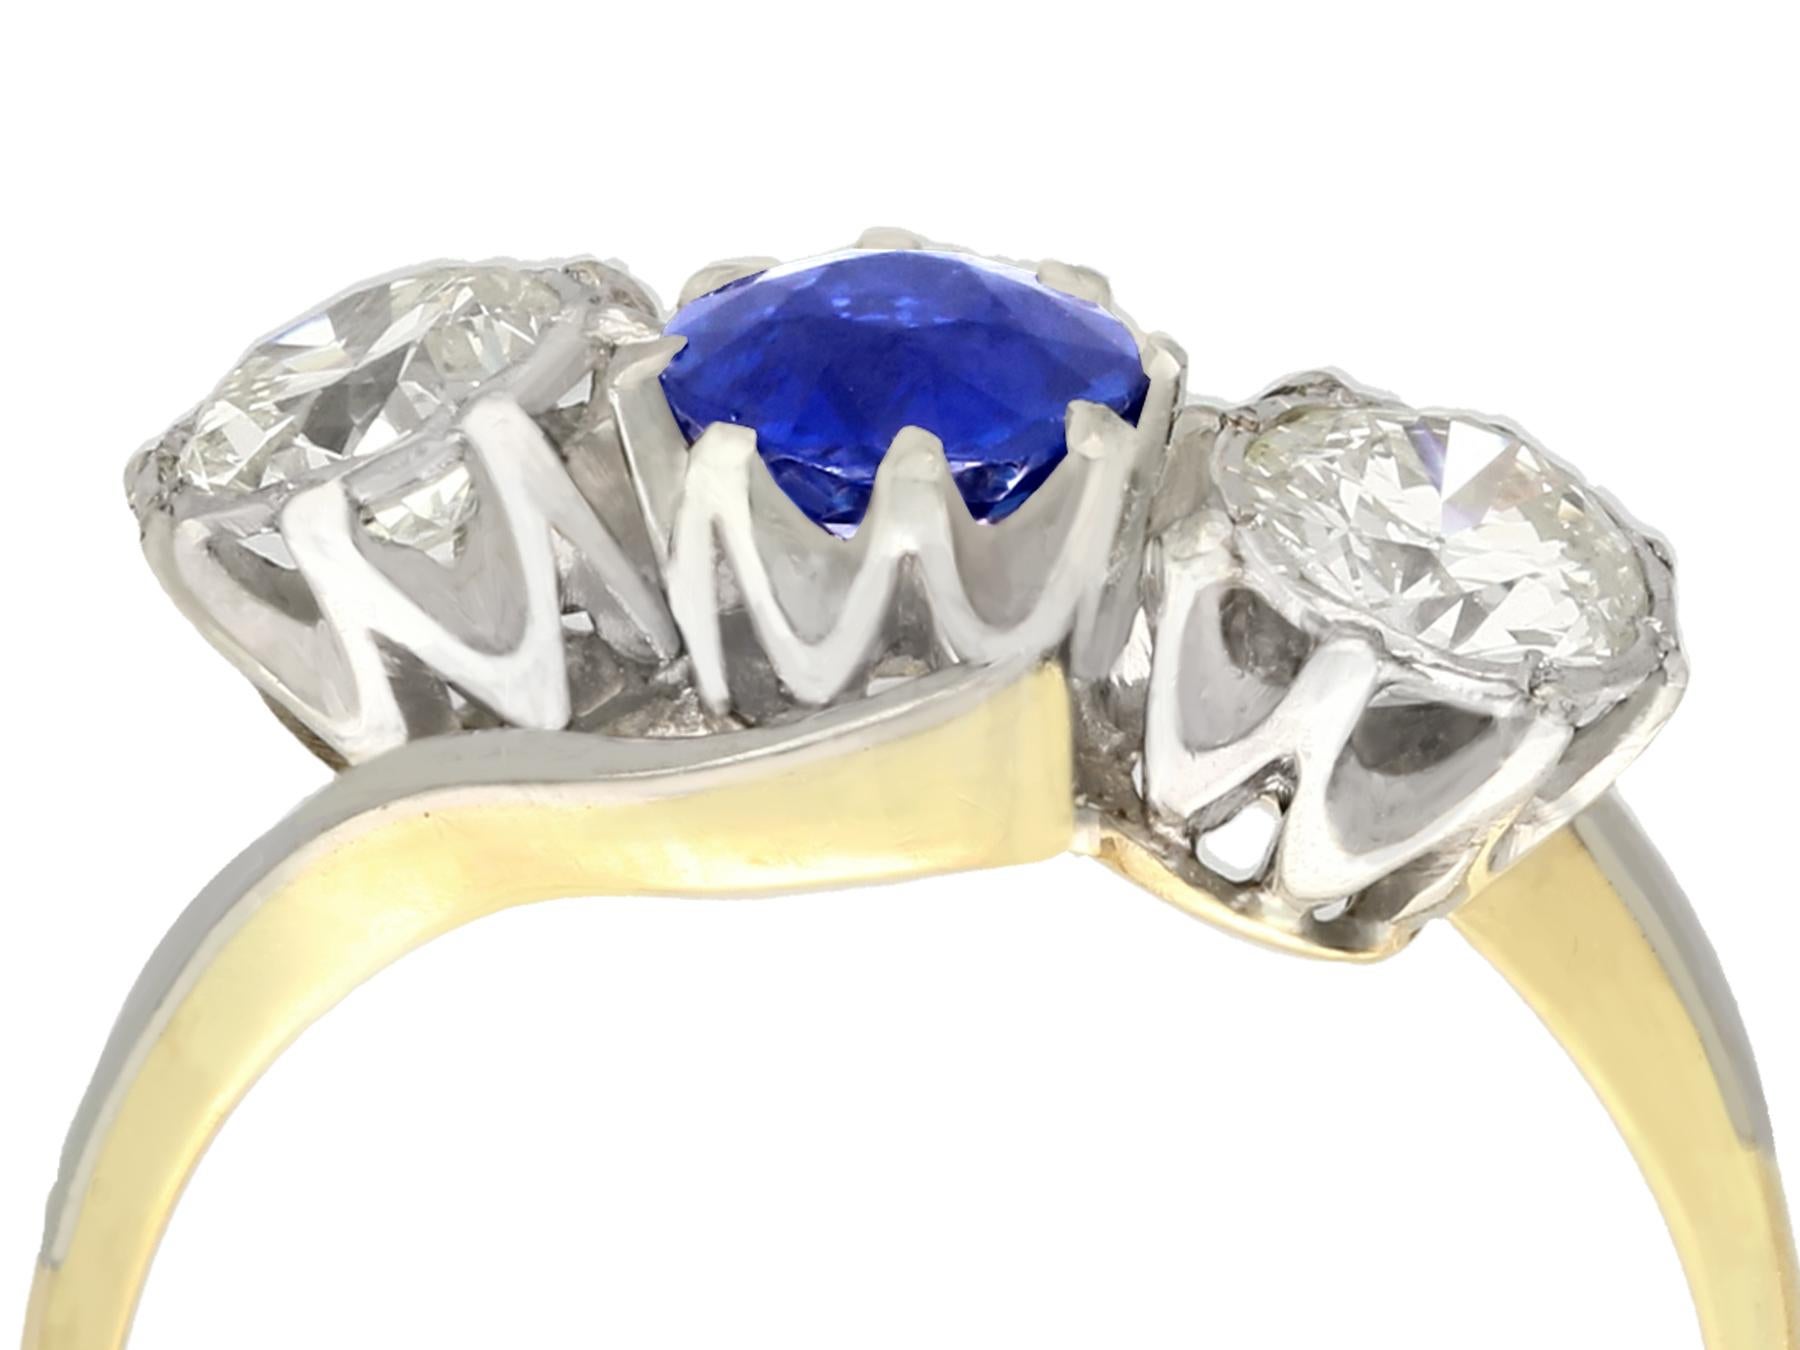 This fine and impressive sapphire and diamond three stone ring has been crafted in 18k yellow gold with a platinum setting.

The twist design mount displays a feature platinum set 0.70Ct round mixed cut natural blue sapphire.

The sapphire is